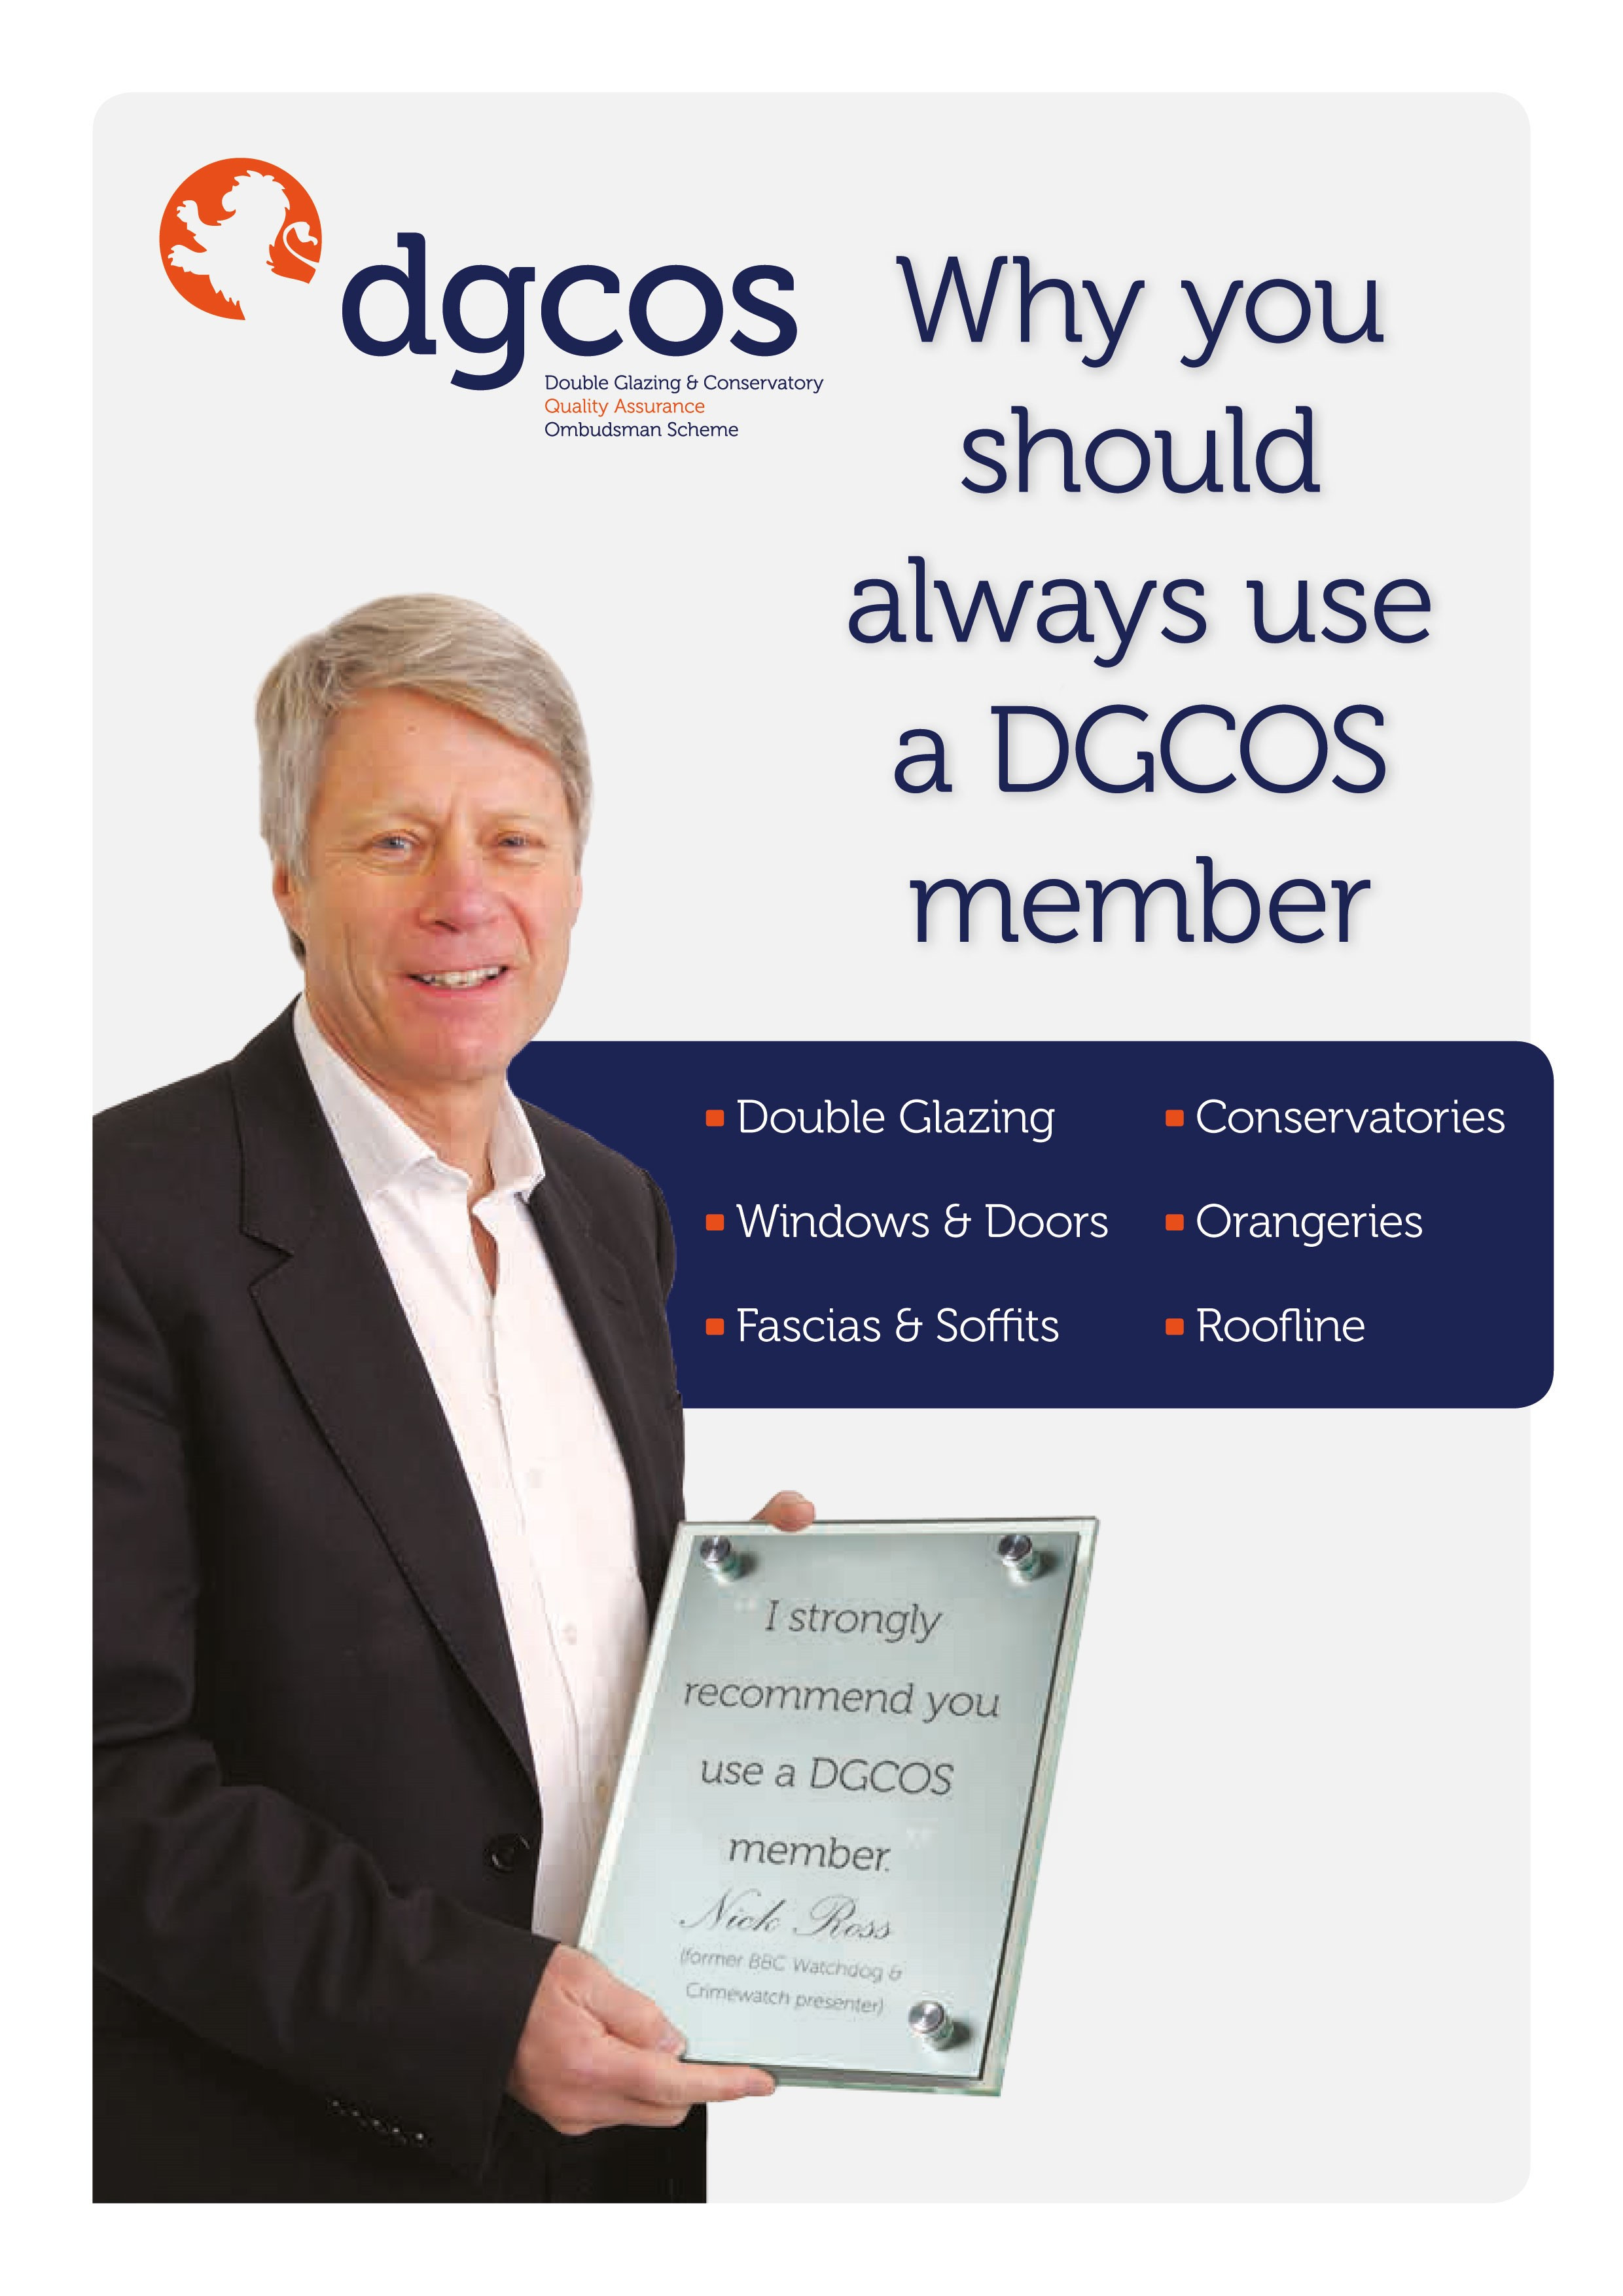 Download our DGCOS brochure